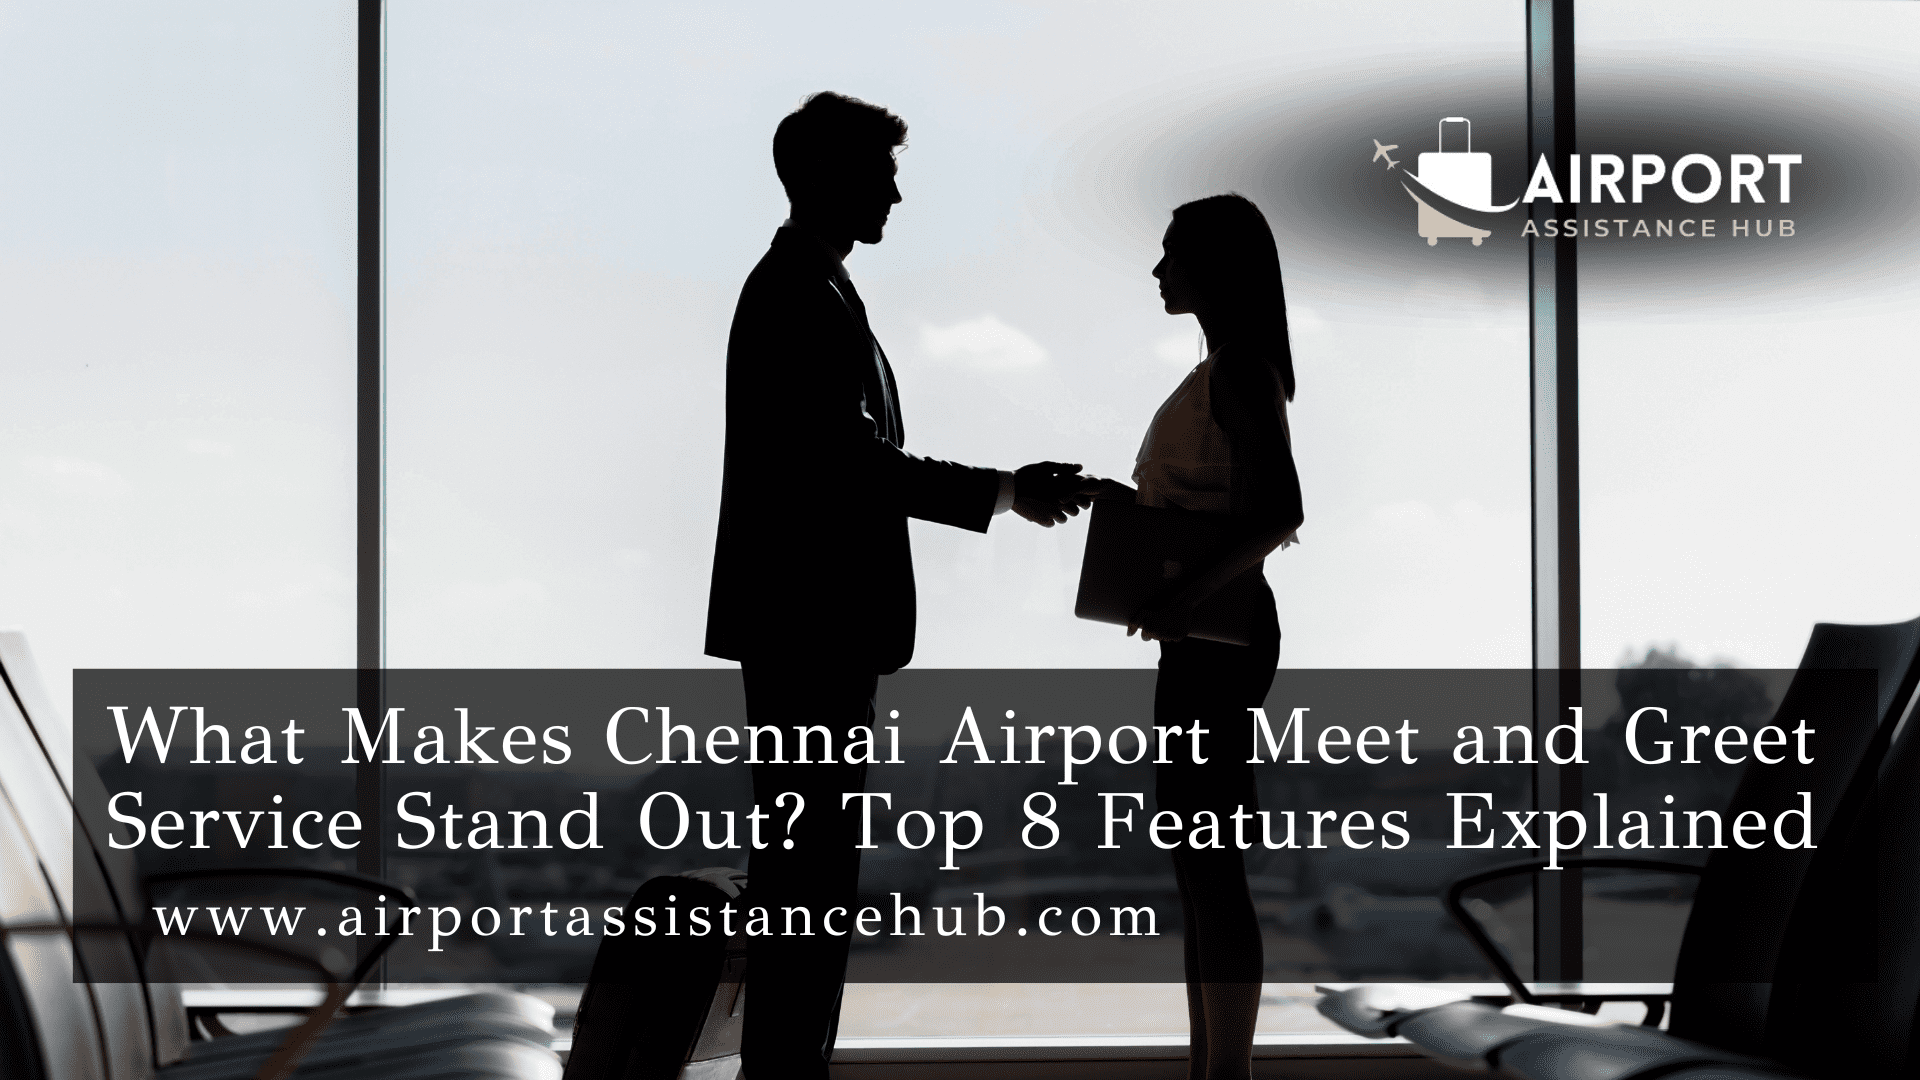 What Makes Chennai Airport Meet and Greet Service Stand Out? Top 8 Features Explained